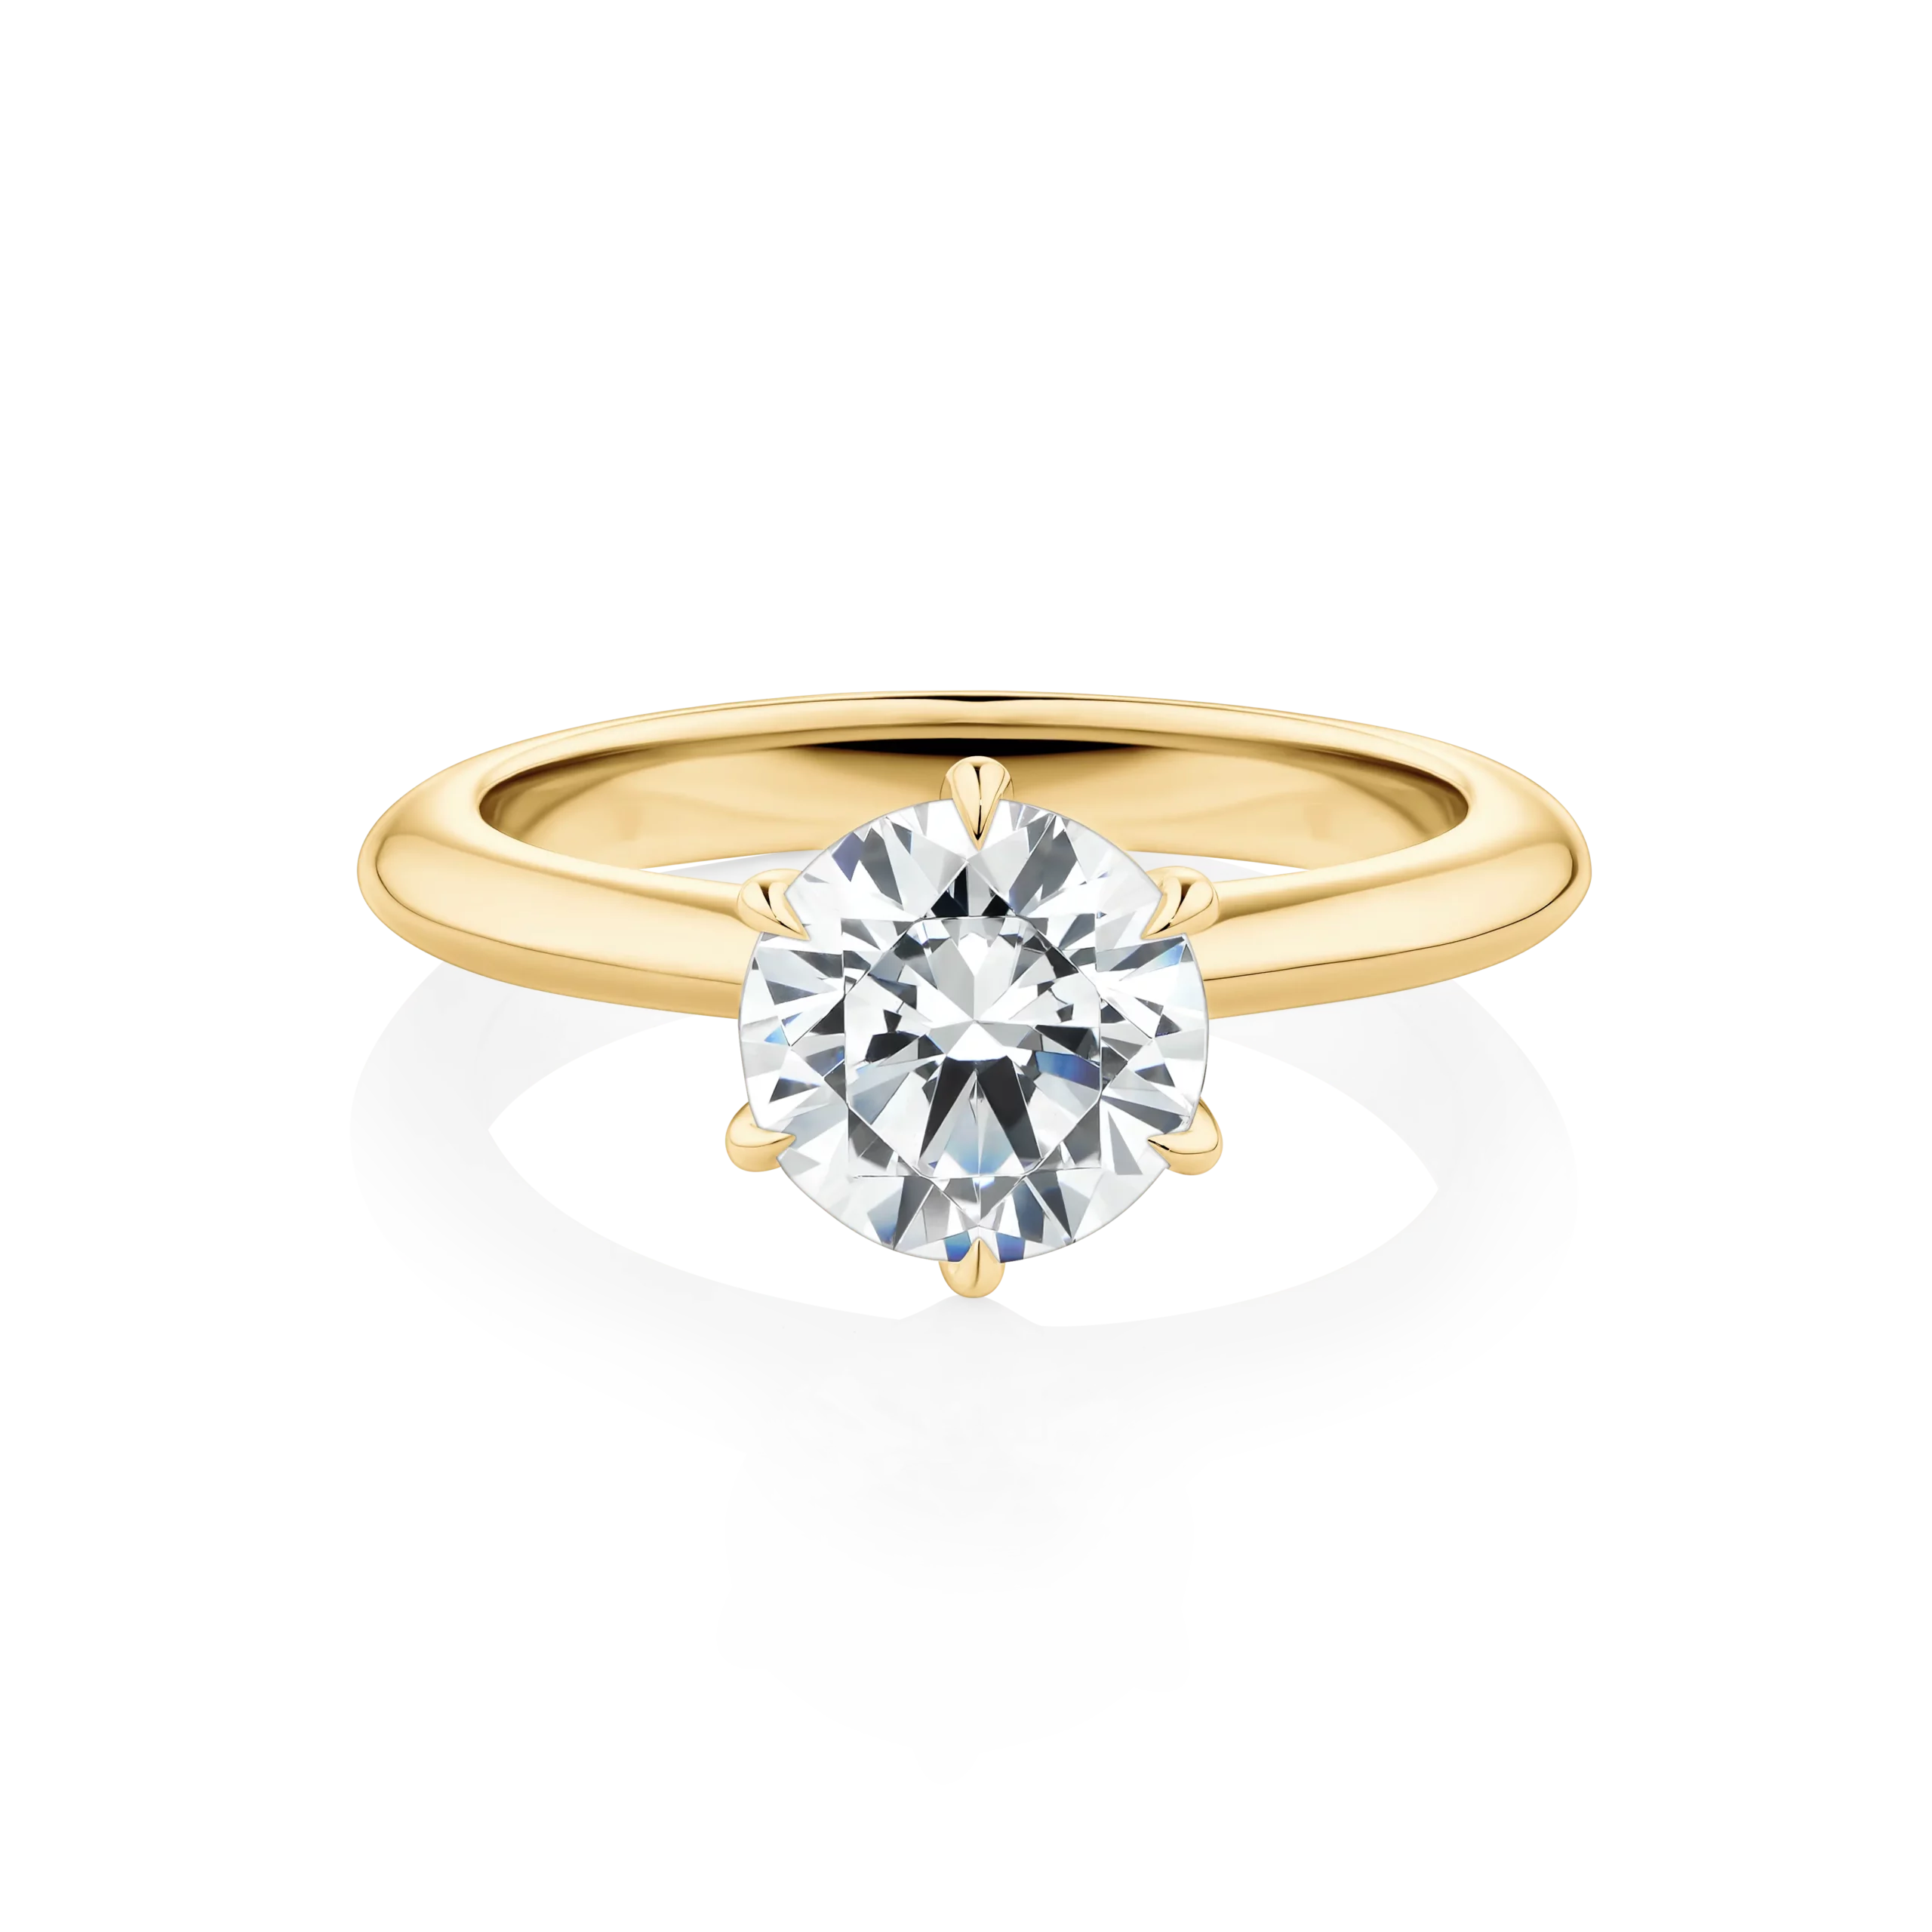 Southern-Star-Yellow-Gold-6-claw-Round-Cut-Diamond-Engagement-Ring